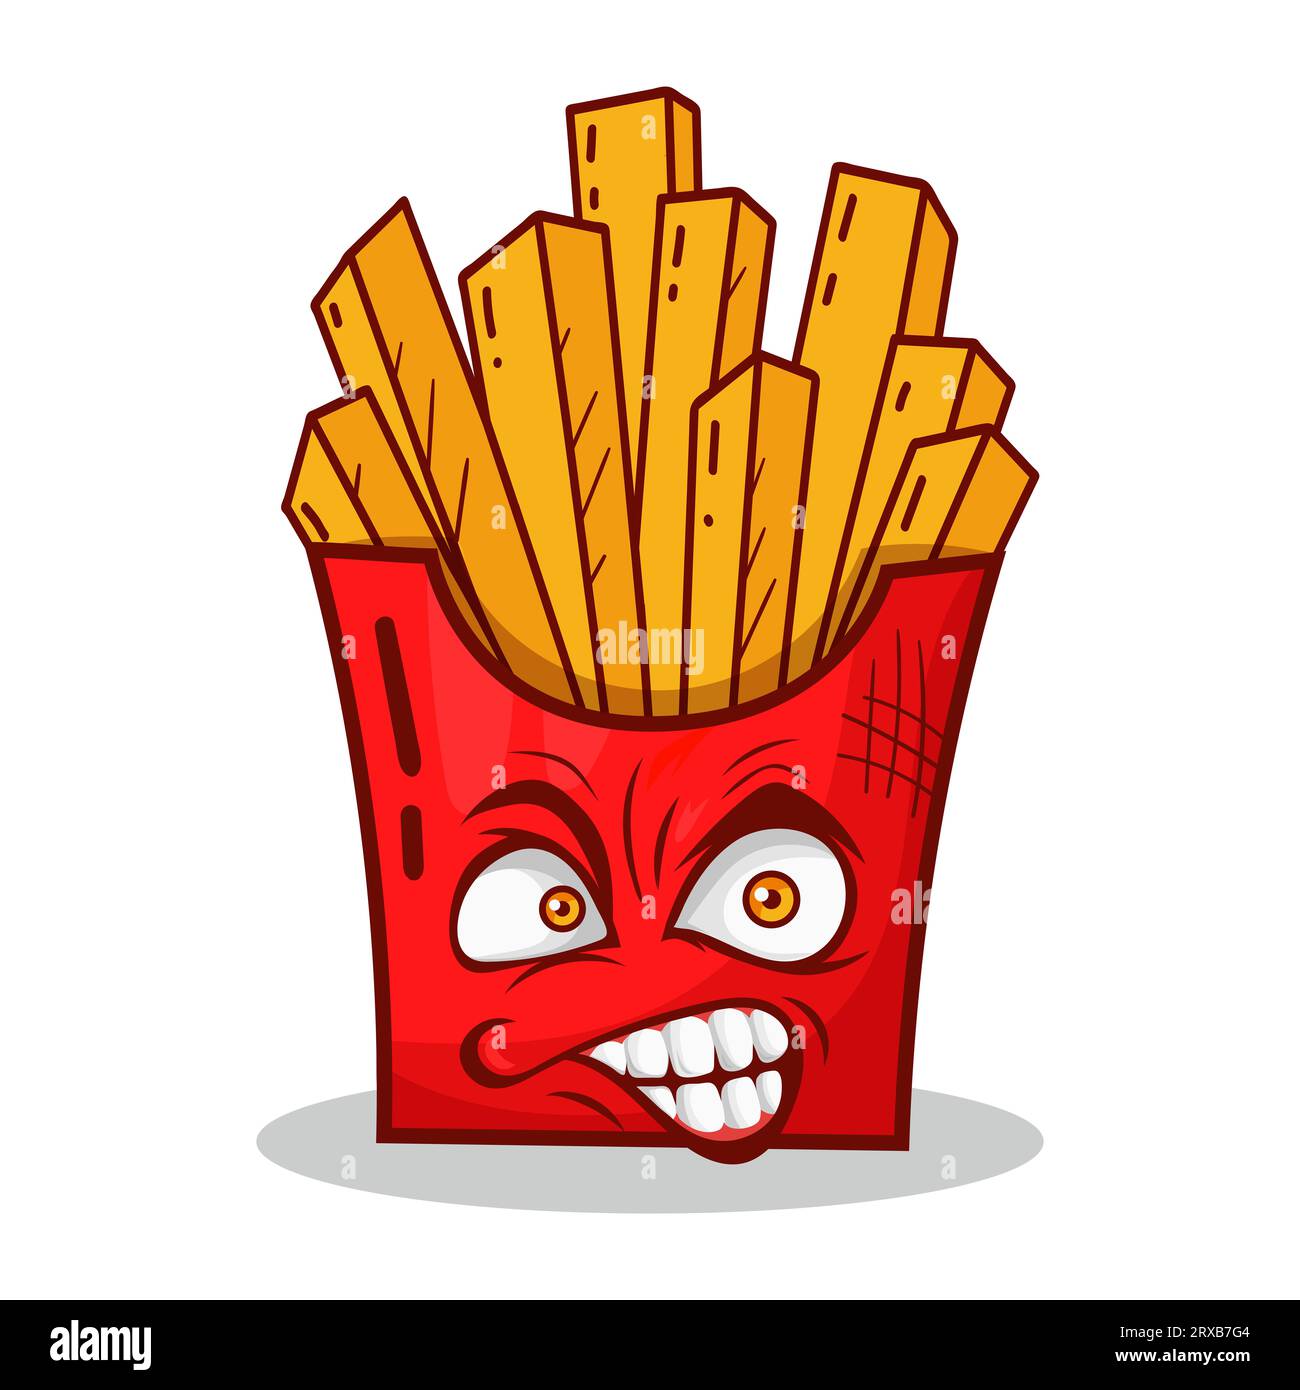 Angry Face French Fry Mascot Illustration. Angry Food Mascot Stockfoto